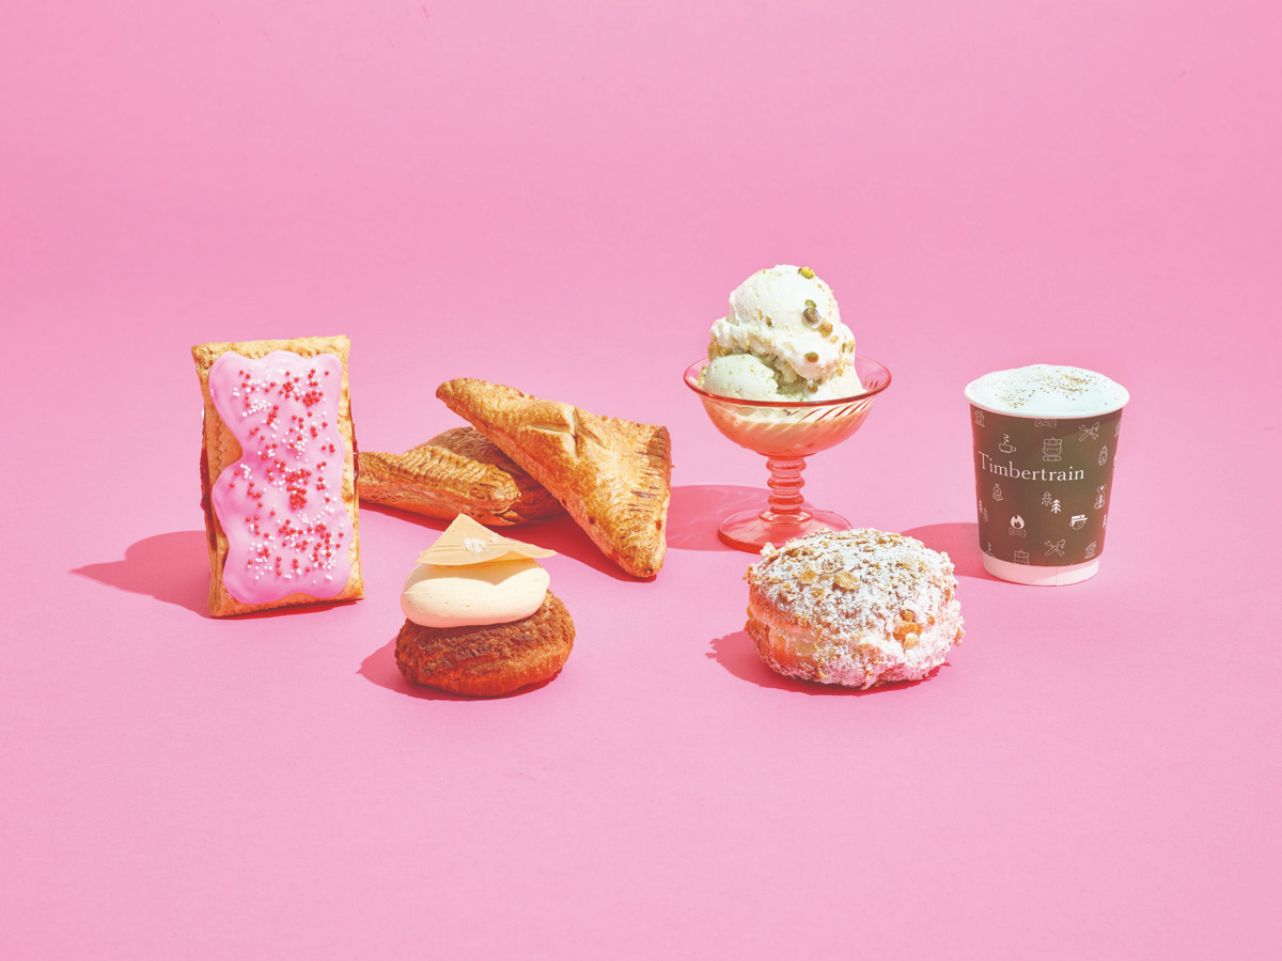 a pop tart, dish of ice cream, donut, coffee and pastry all sit on a pink background